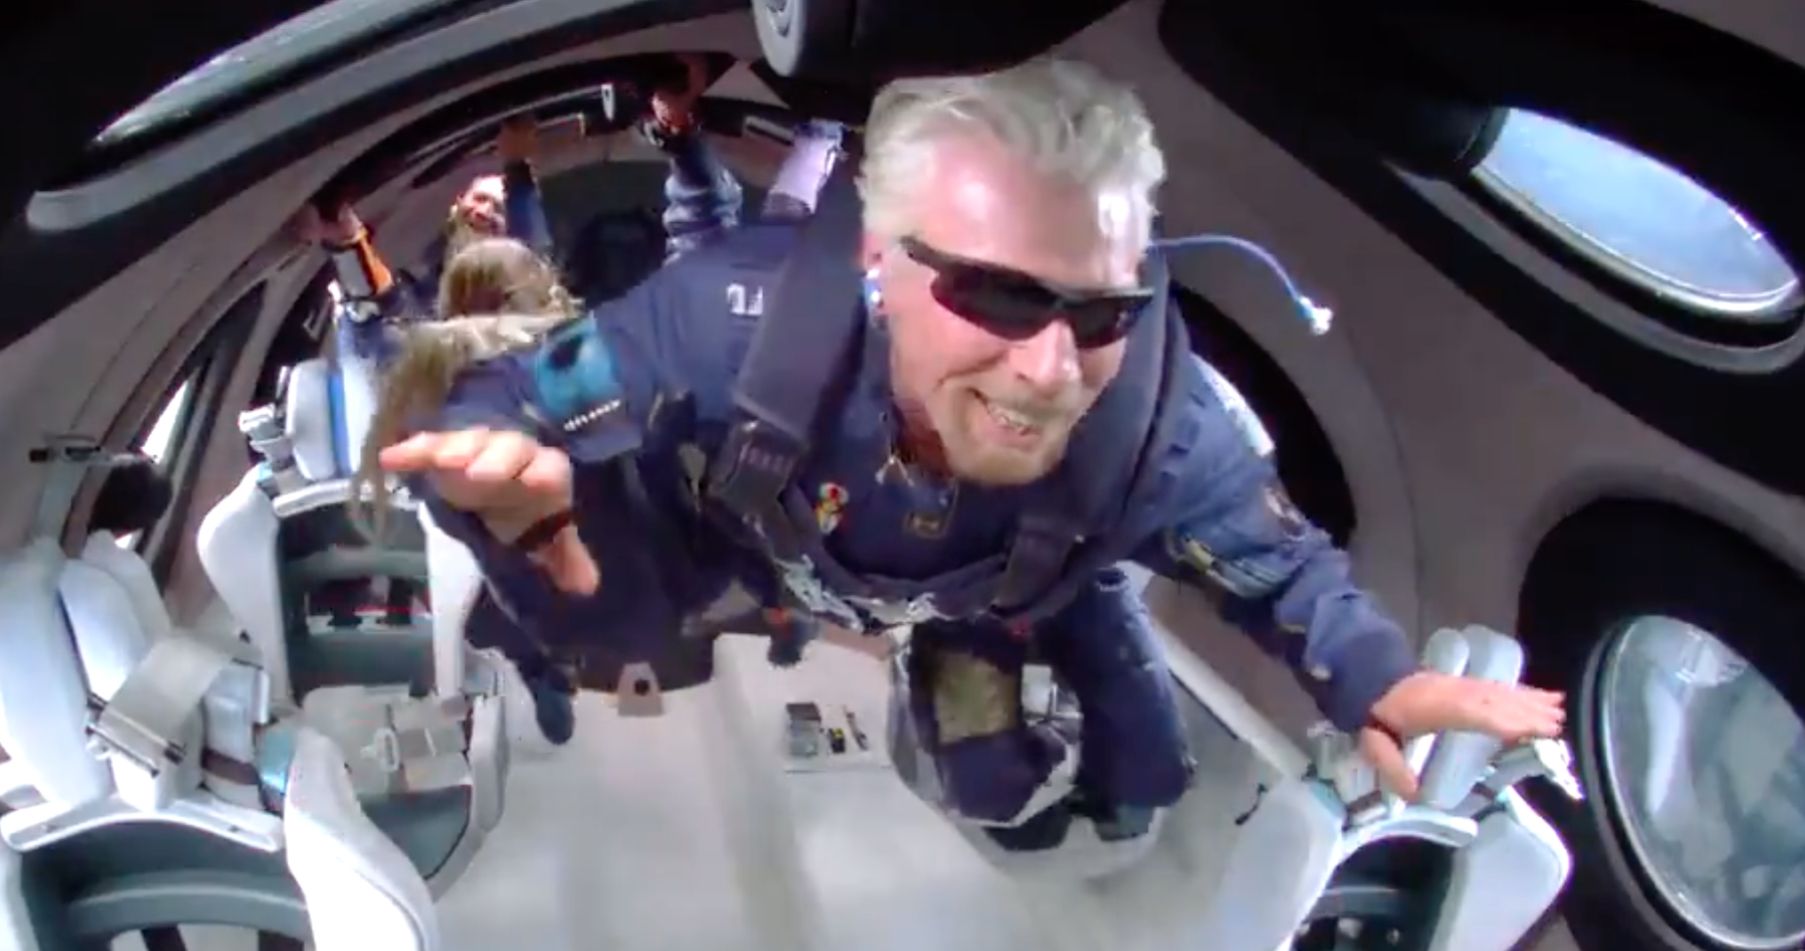 Richard Branson Shares His 'Extraordinary' Space Flight Experience with Stephen Colbert